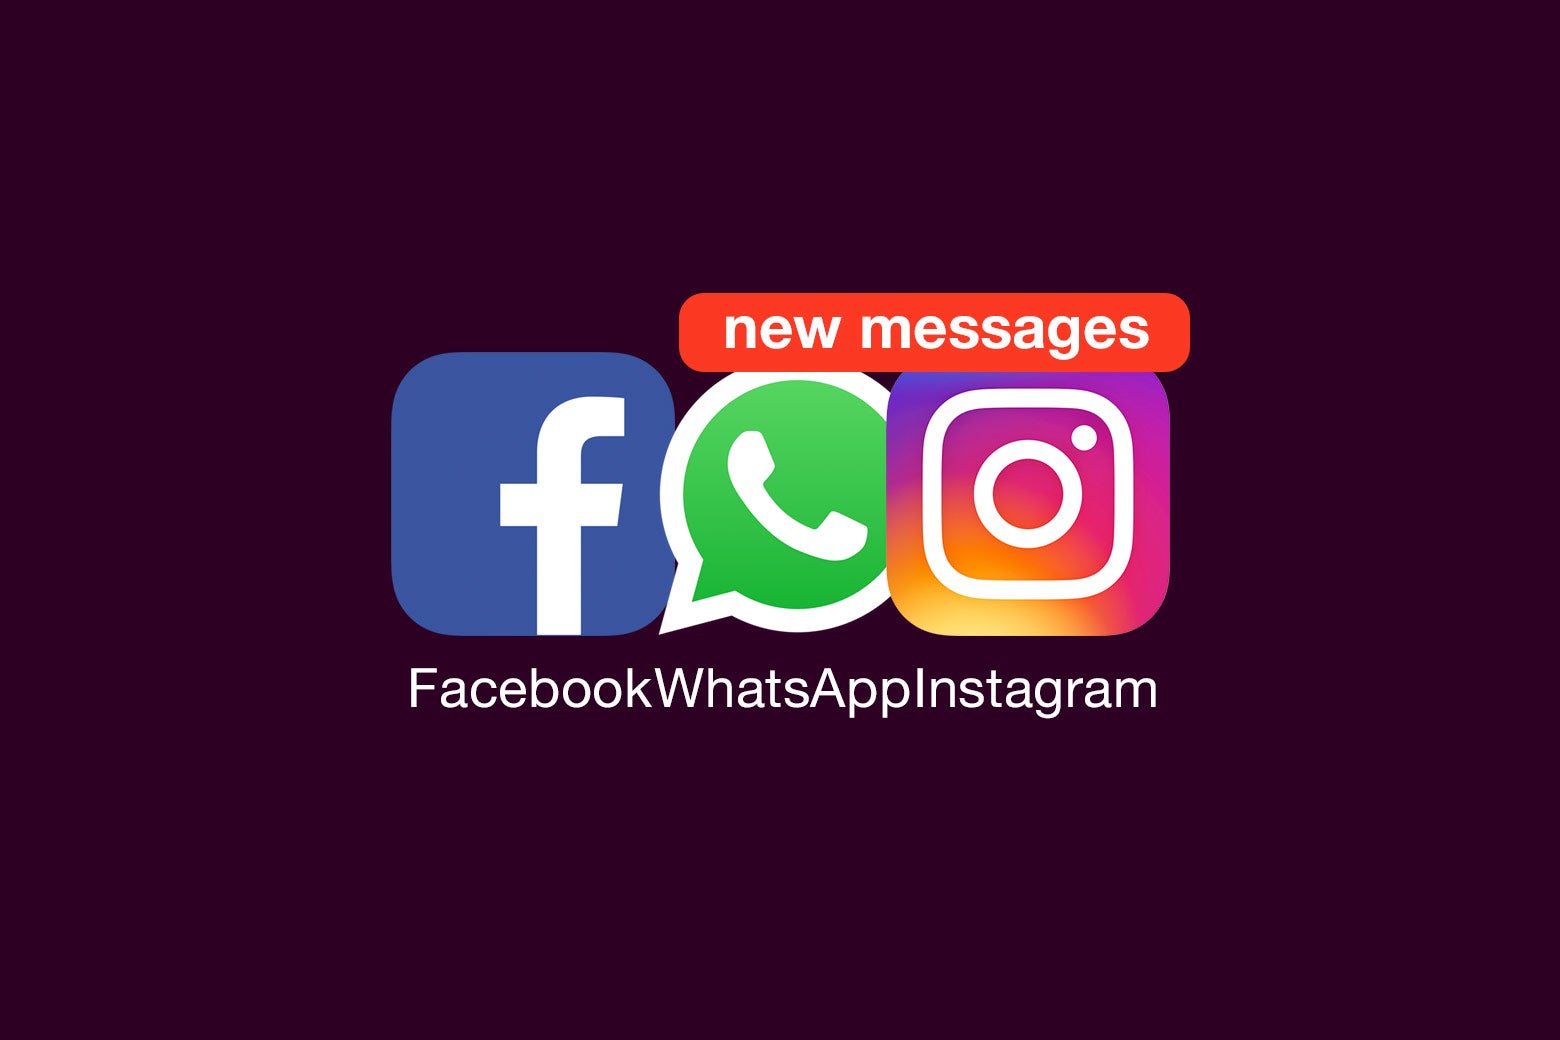 Icons for Facebook, WhatsApp, and Instagram with a red text bubble that says "New messages."